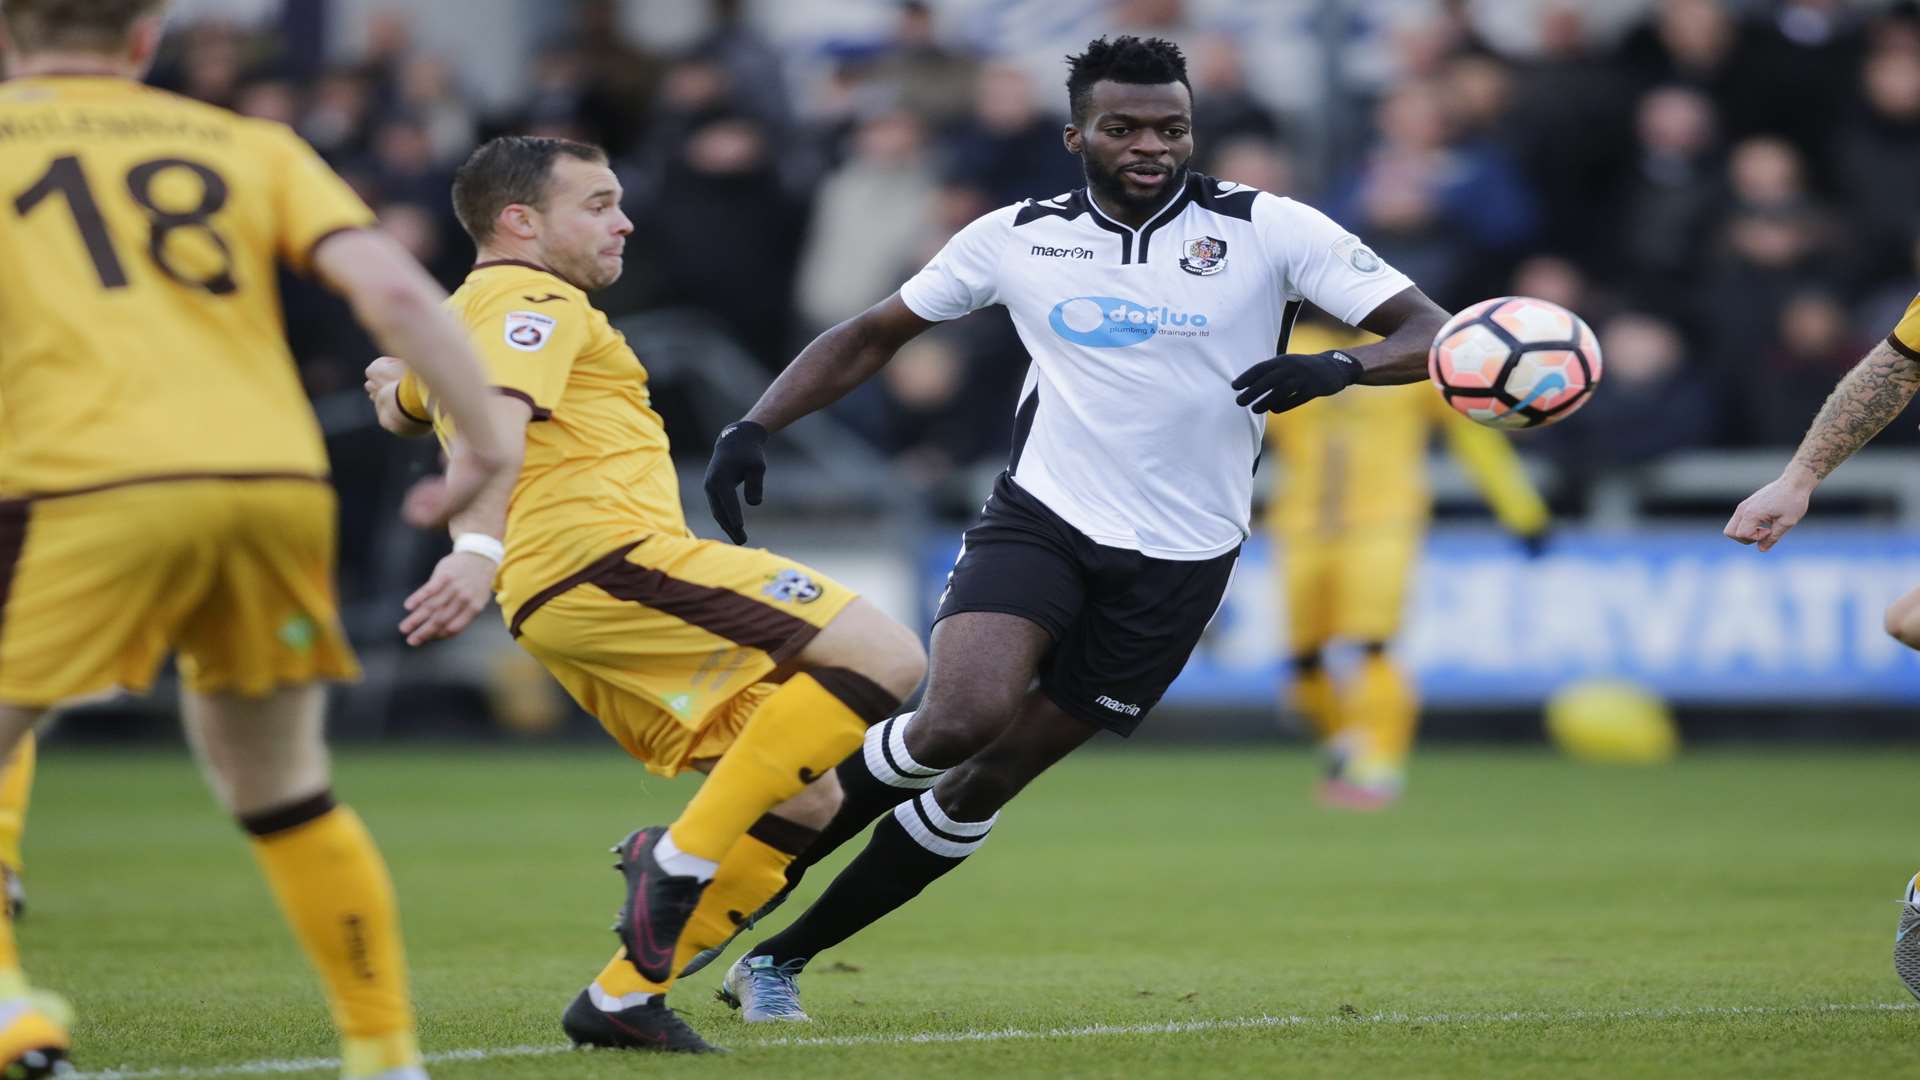 Duane Ofori-Acheampong has signed a new deal at Dartford Picture: Martin Apps